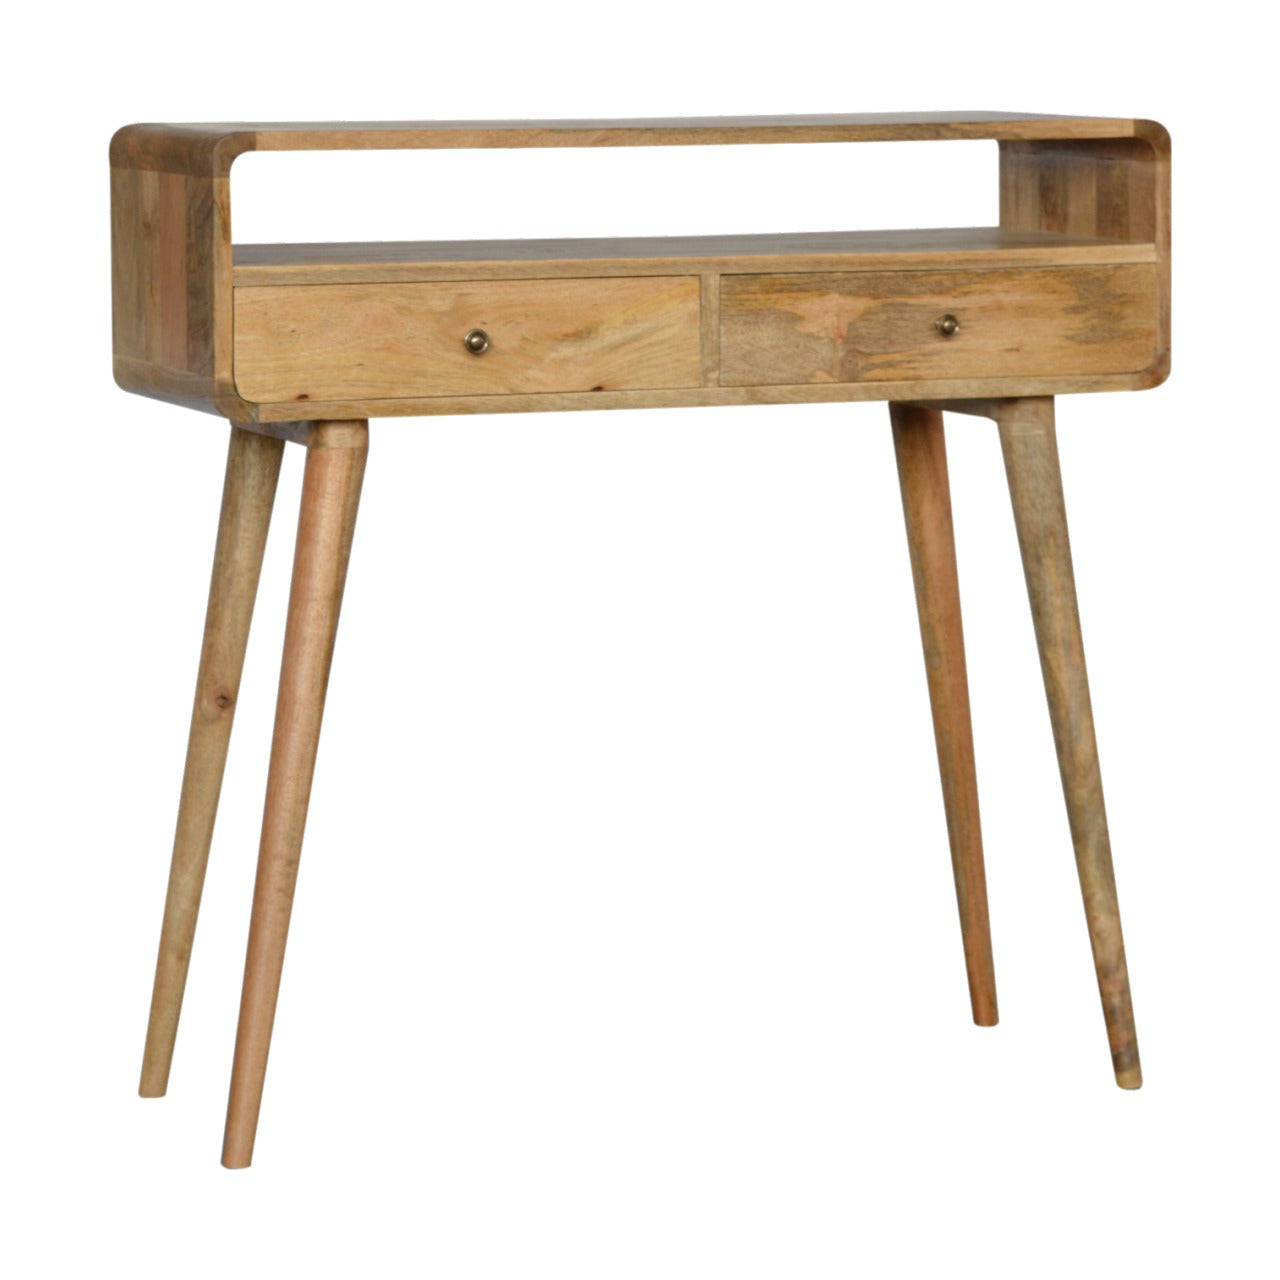 Curved Oak-Ish Console Table by Artisan Furniture